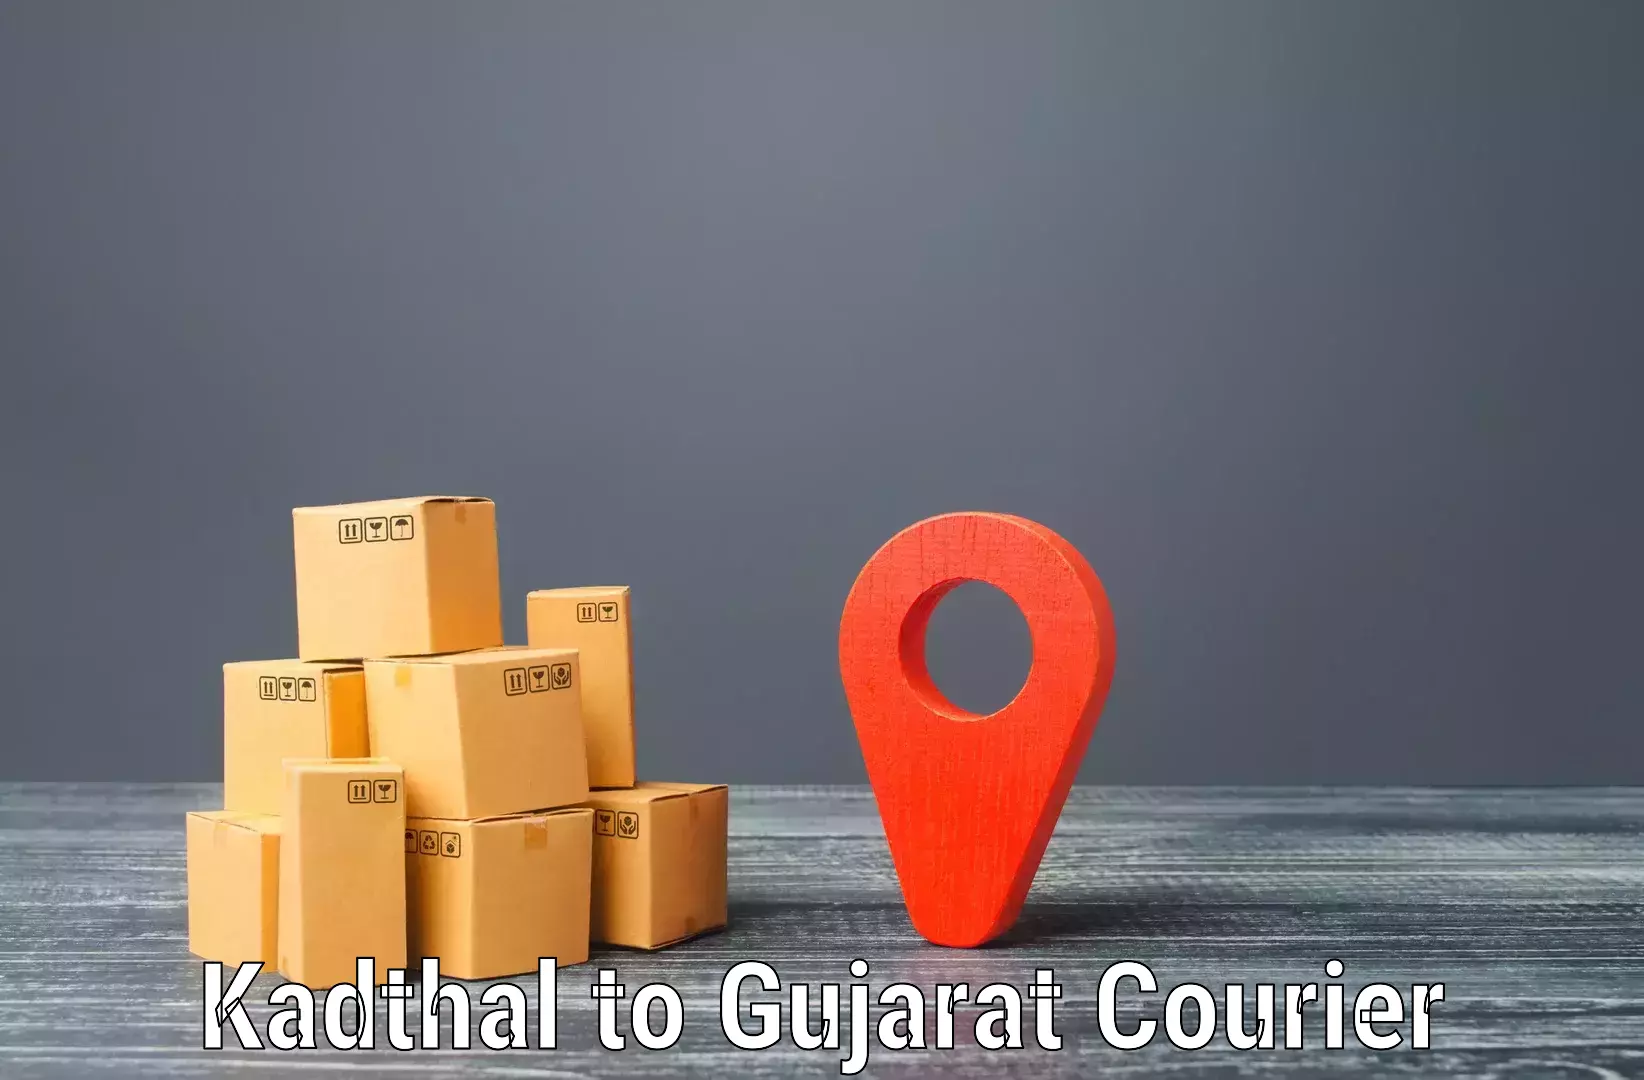 Advanced shipping services Kadthal to Bilimora